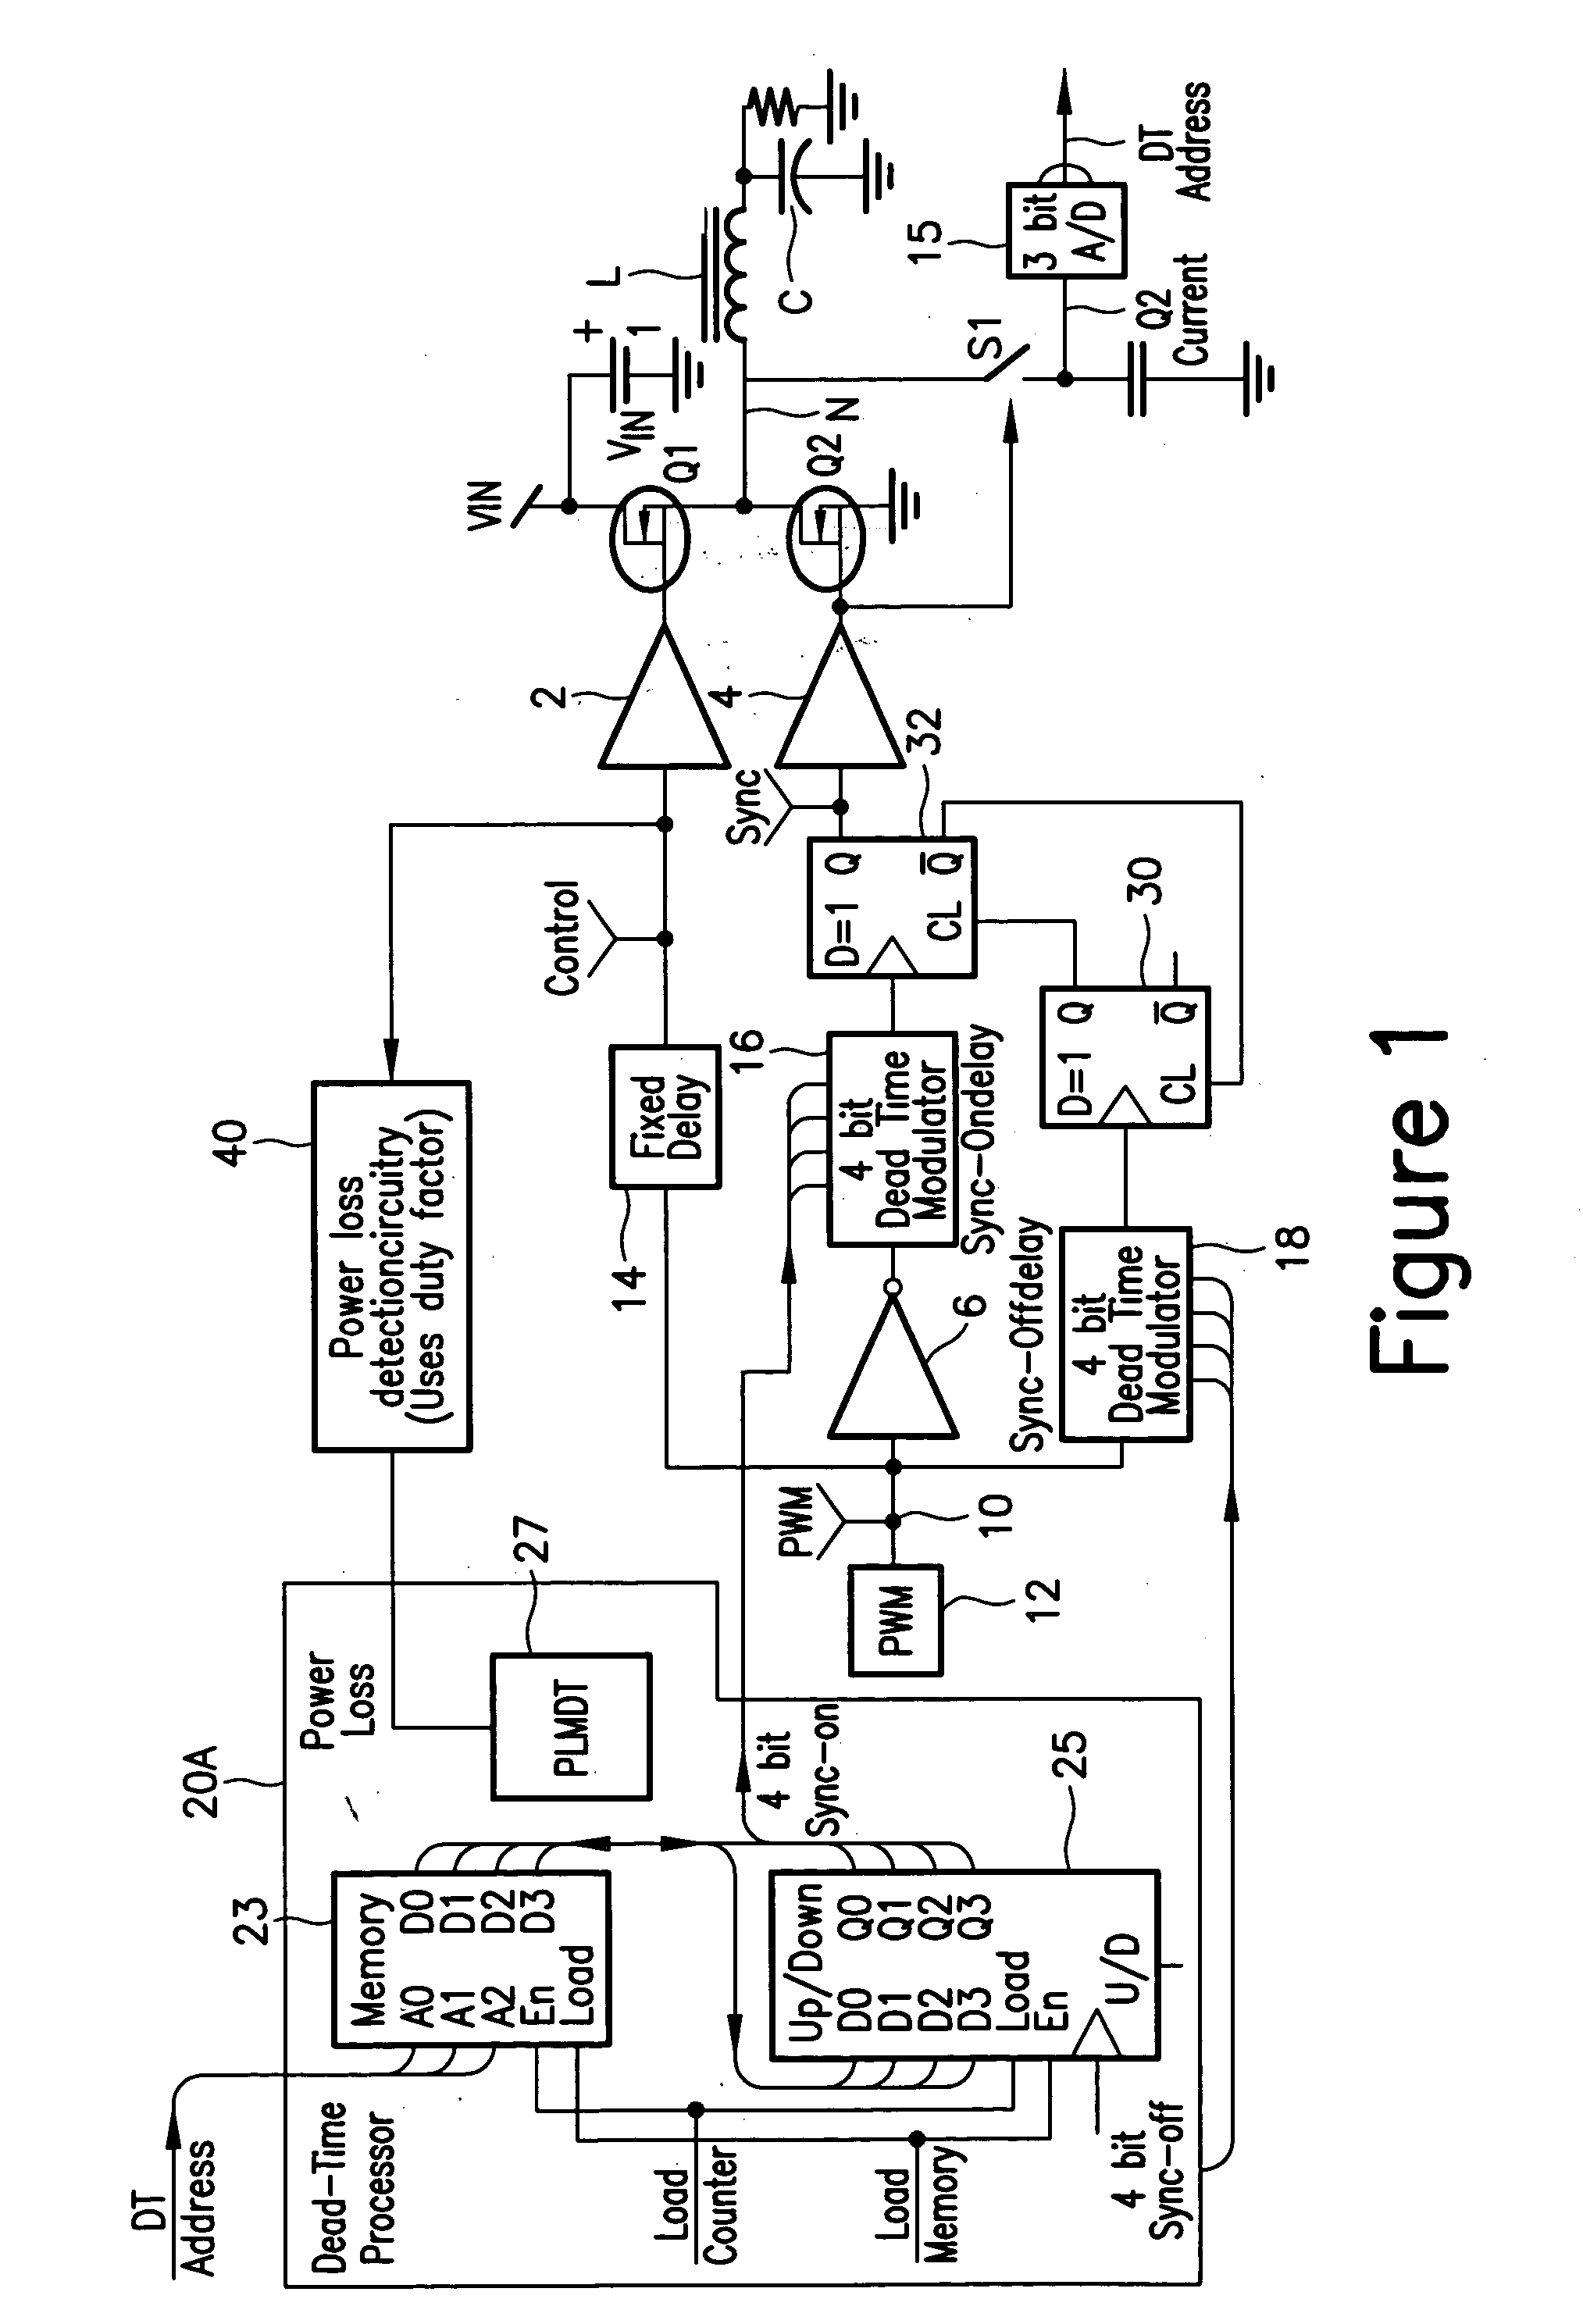 Method and apparatus for intelligently setting dead time